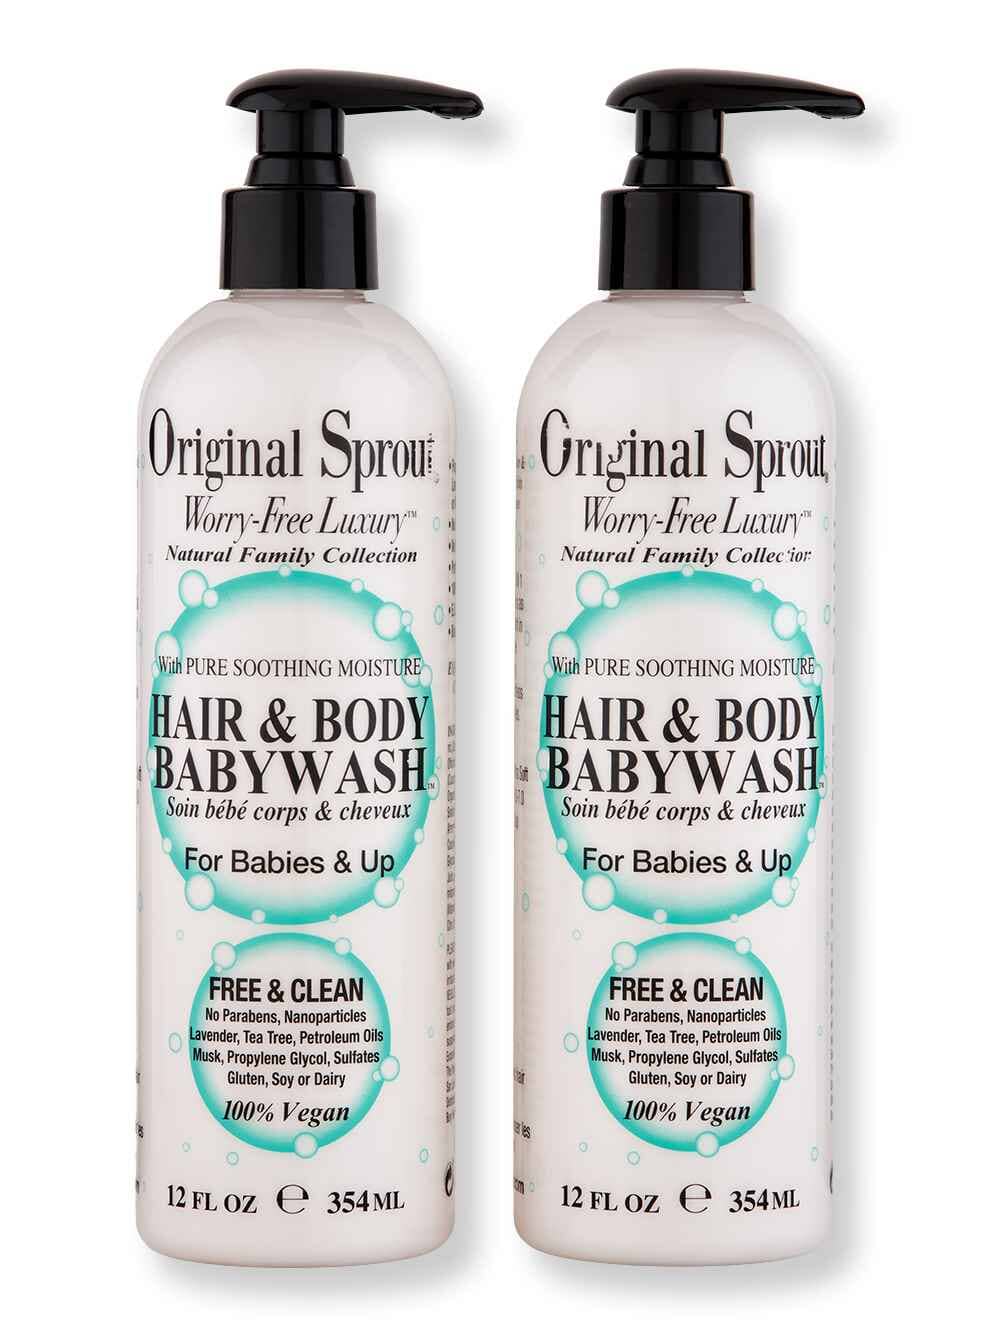 Original Sprout Original Sprout Hair & Body Baby Wash 2 ct 12 oz Baby Shampoos & Washes 